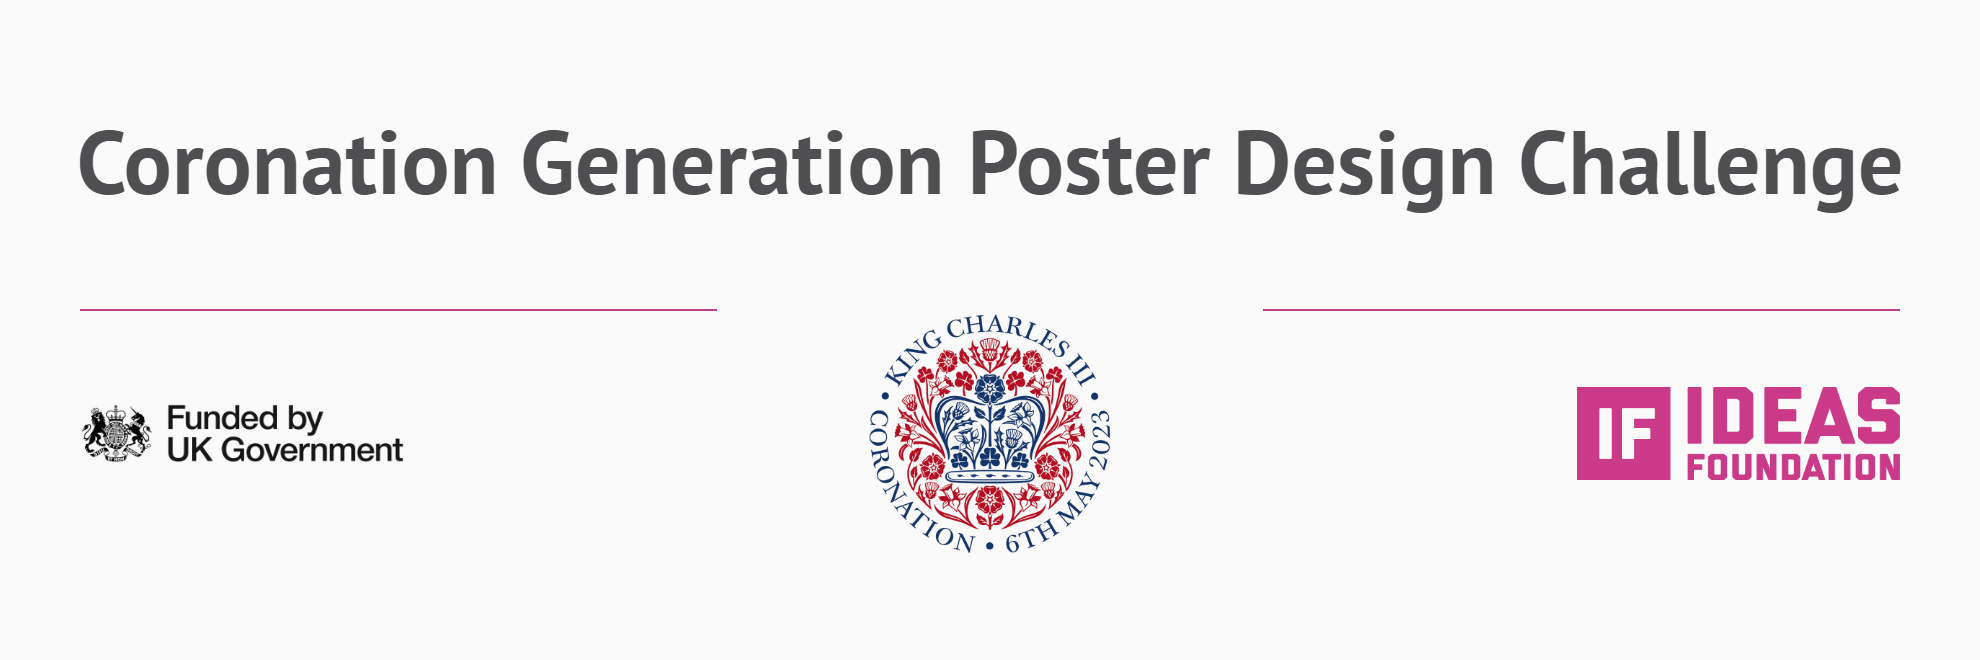 Coronation Generation Poster Design Challenge (graphical text and project logos)